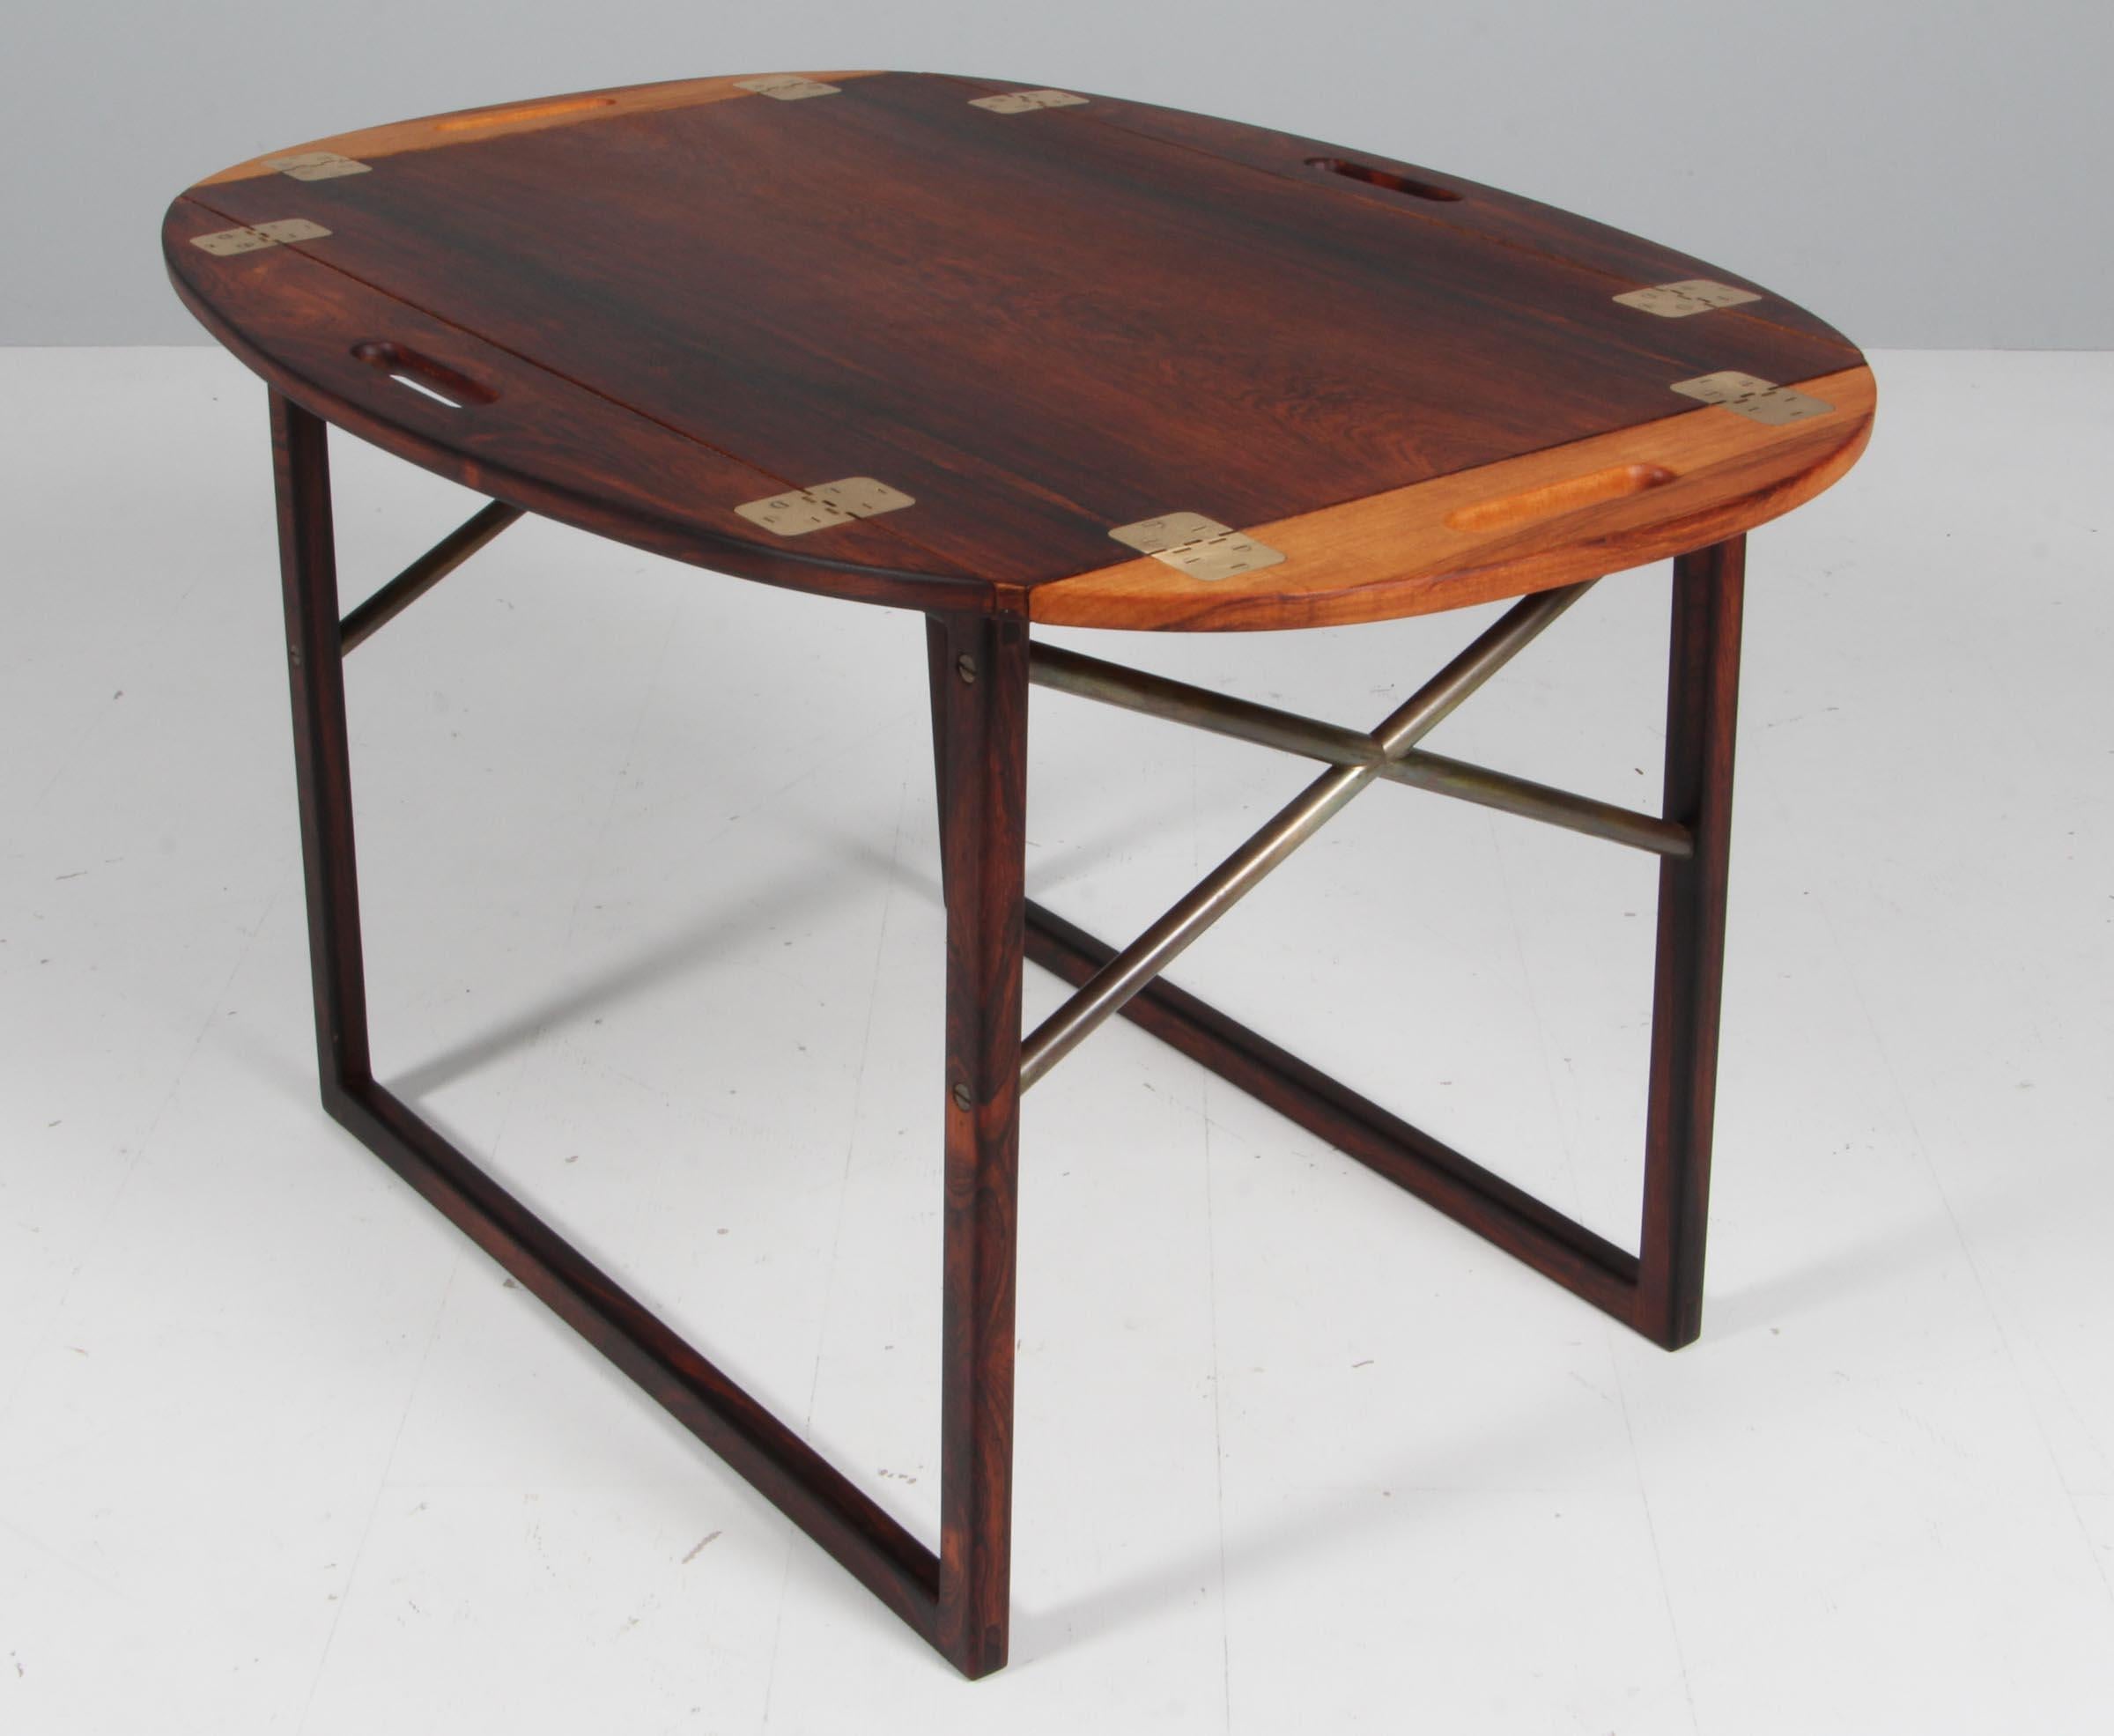 Scandinavian Modern Rosewood and Brass Tray or Butlers Table by Svend Langkilde for Illums Bolighus